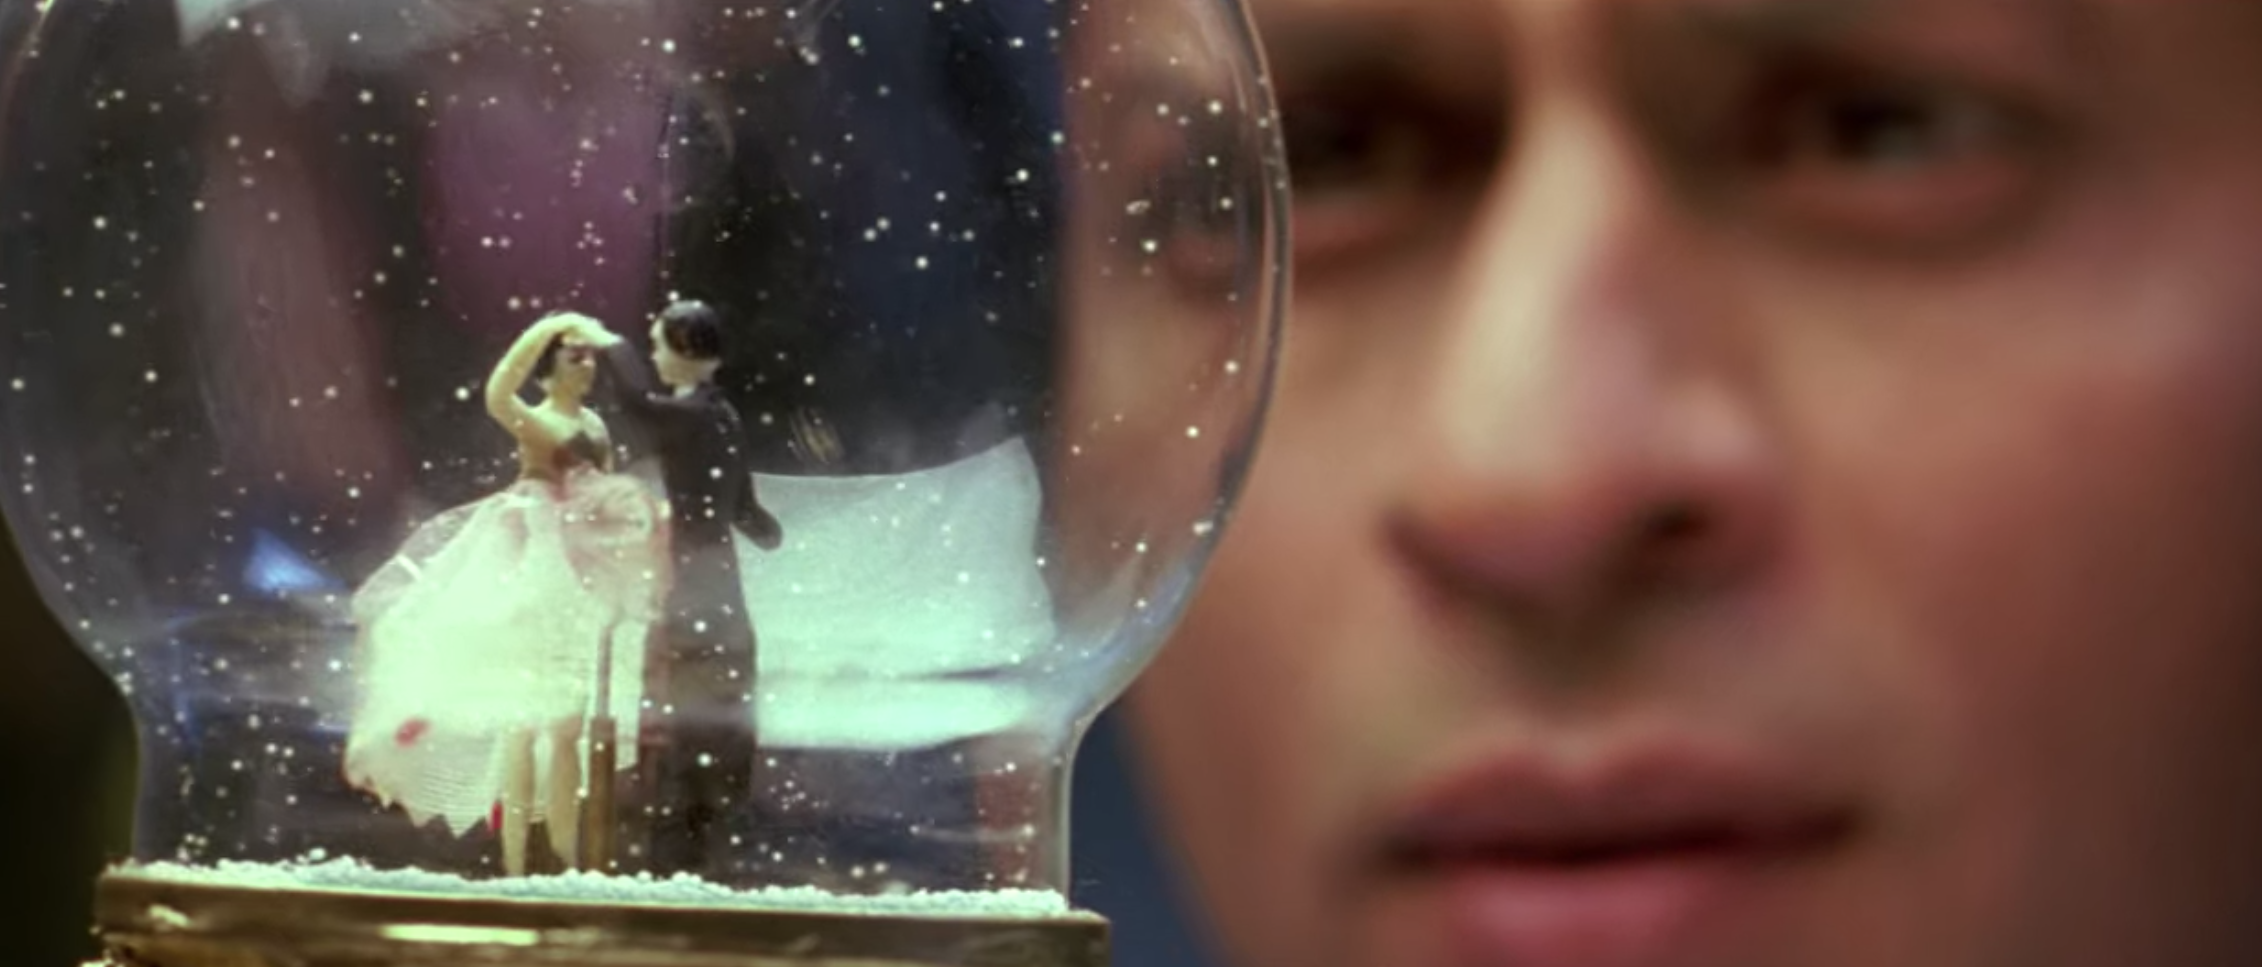 Om gazes into a snow globe which contains a woman and man dancing in the snow.